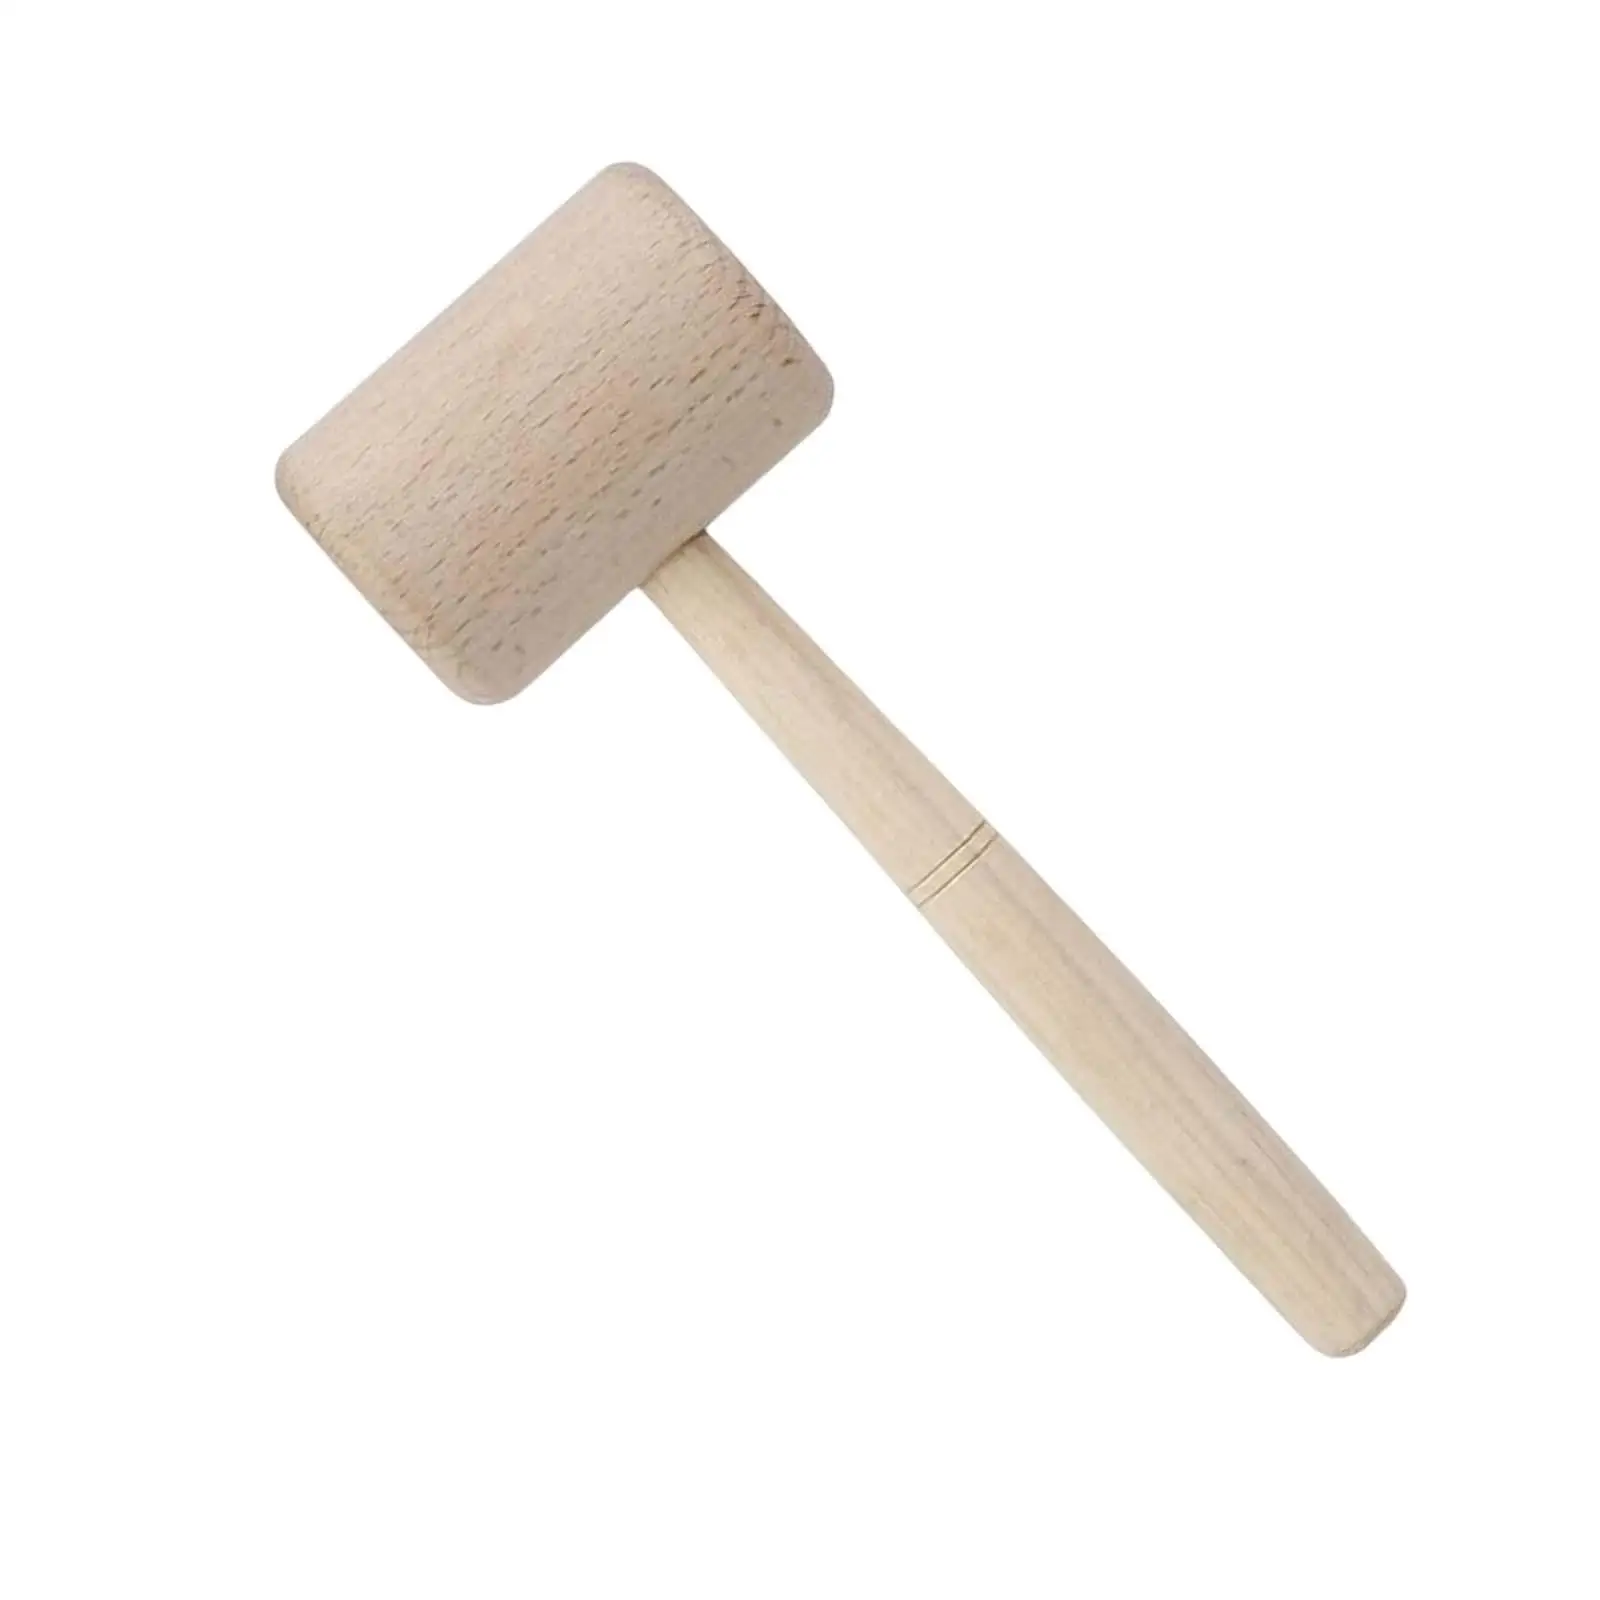 Wooden Mallet Hammer Woodworking Hammer Shock Resistance Wood Hand Tool Beechwood Woodworking Tool Wooden Mallet for Carving DIY